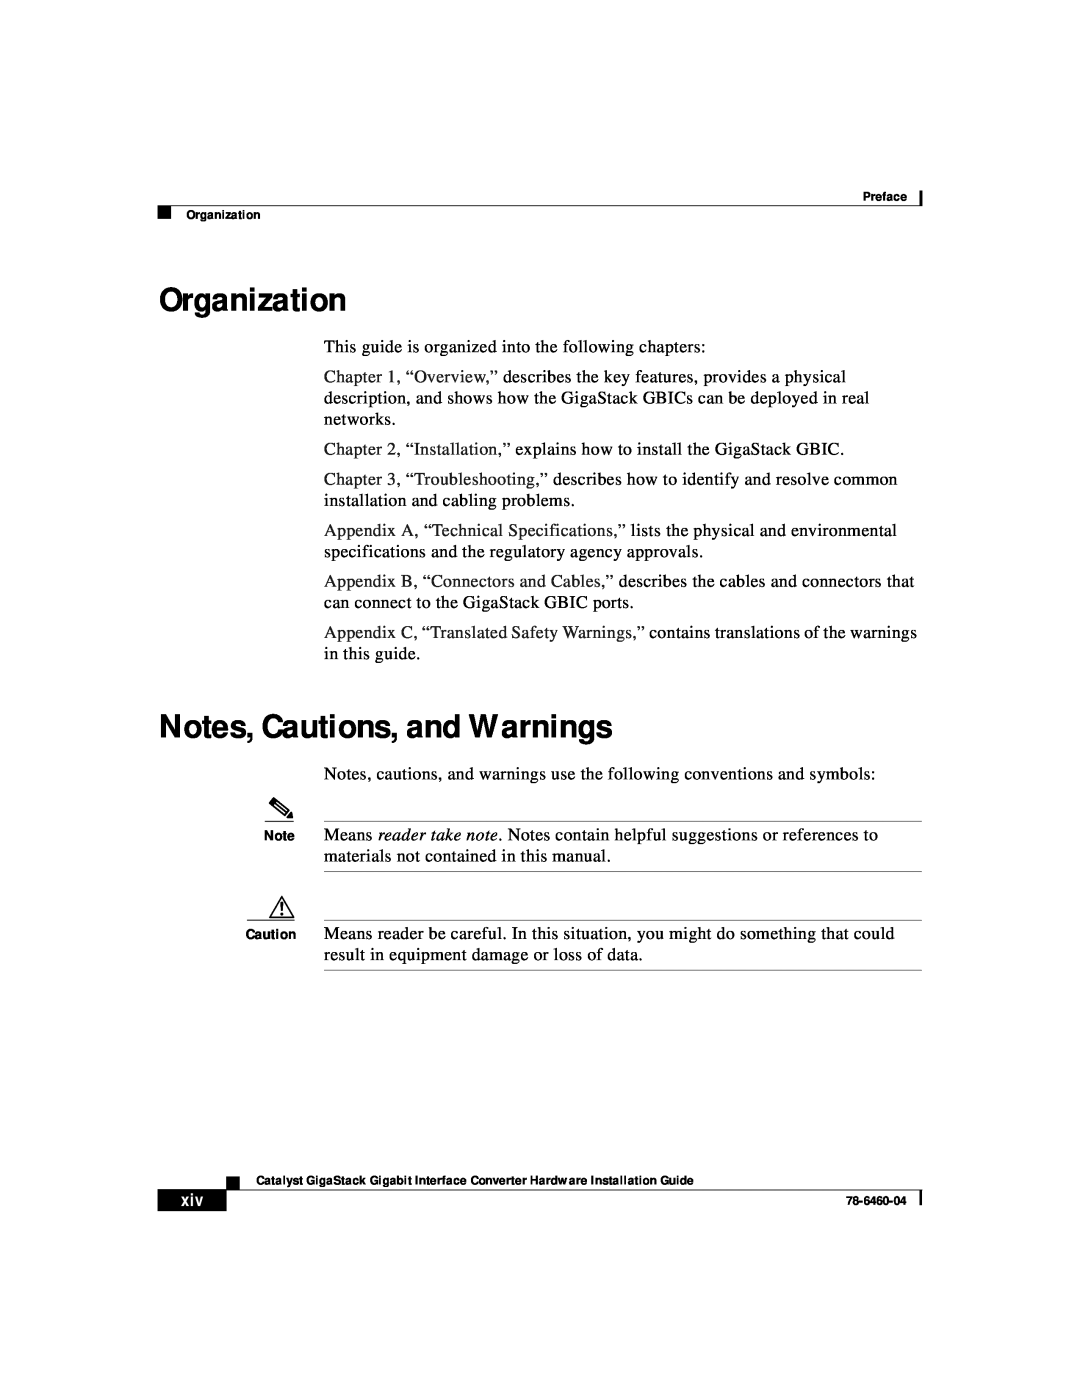 Cisco Systems WS-X3500-XL manual Organization, Notes, Cautions, and Warnings 